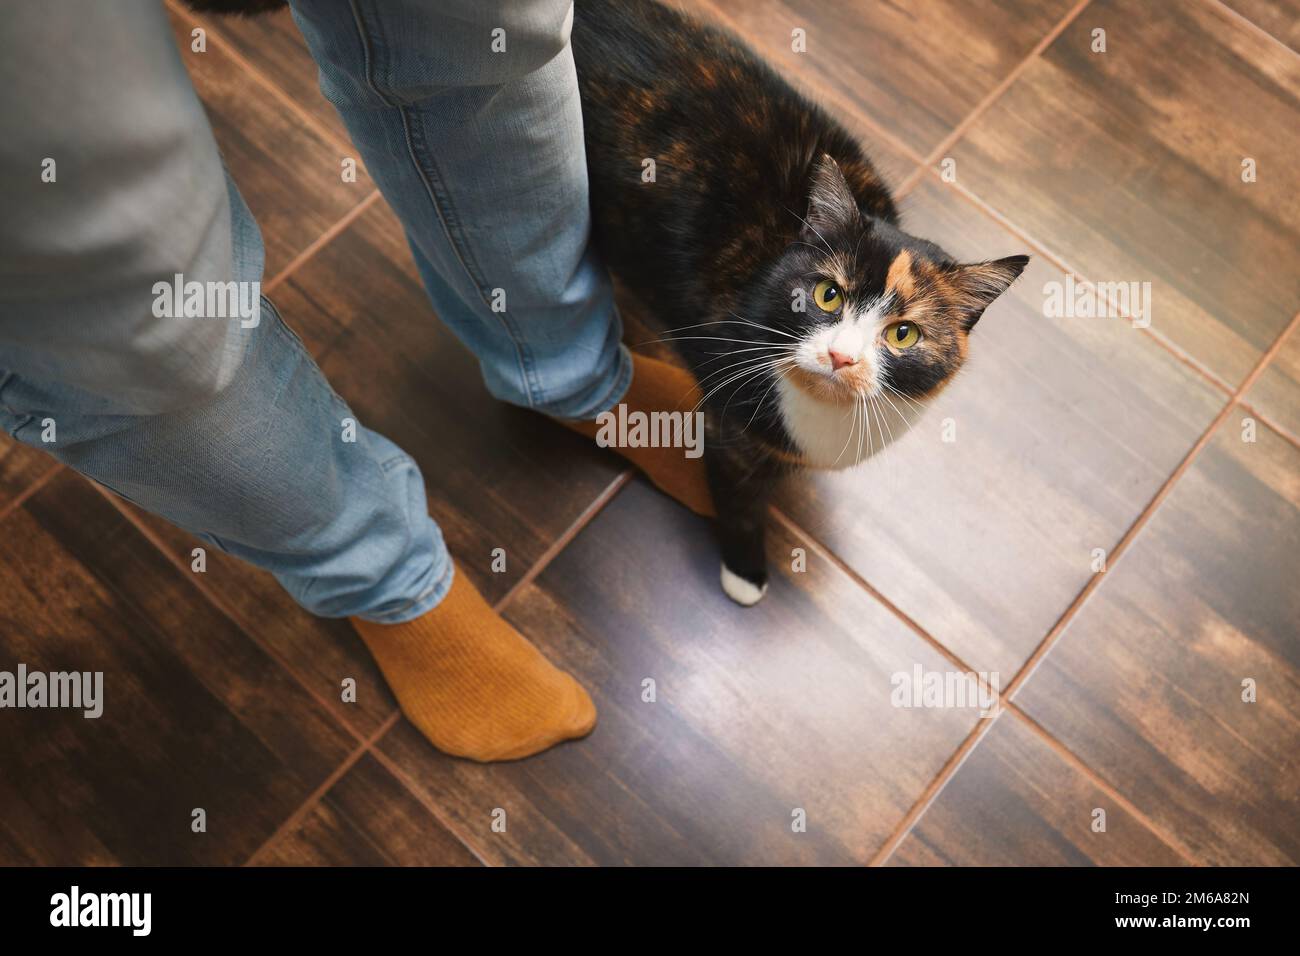 Domestic life with pet. Playful cat welcome his owner at home. Stock Photo